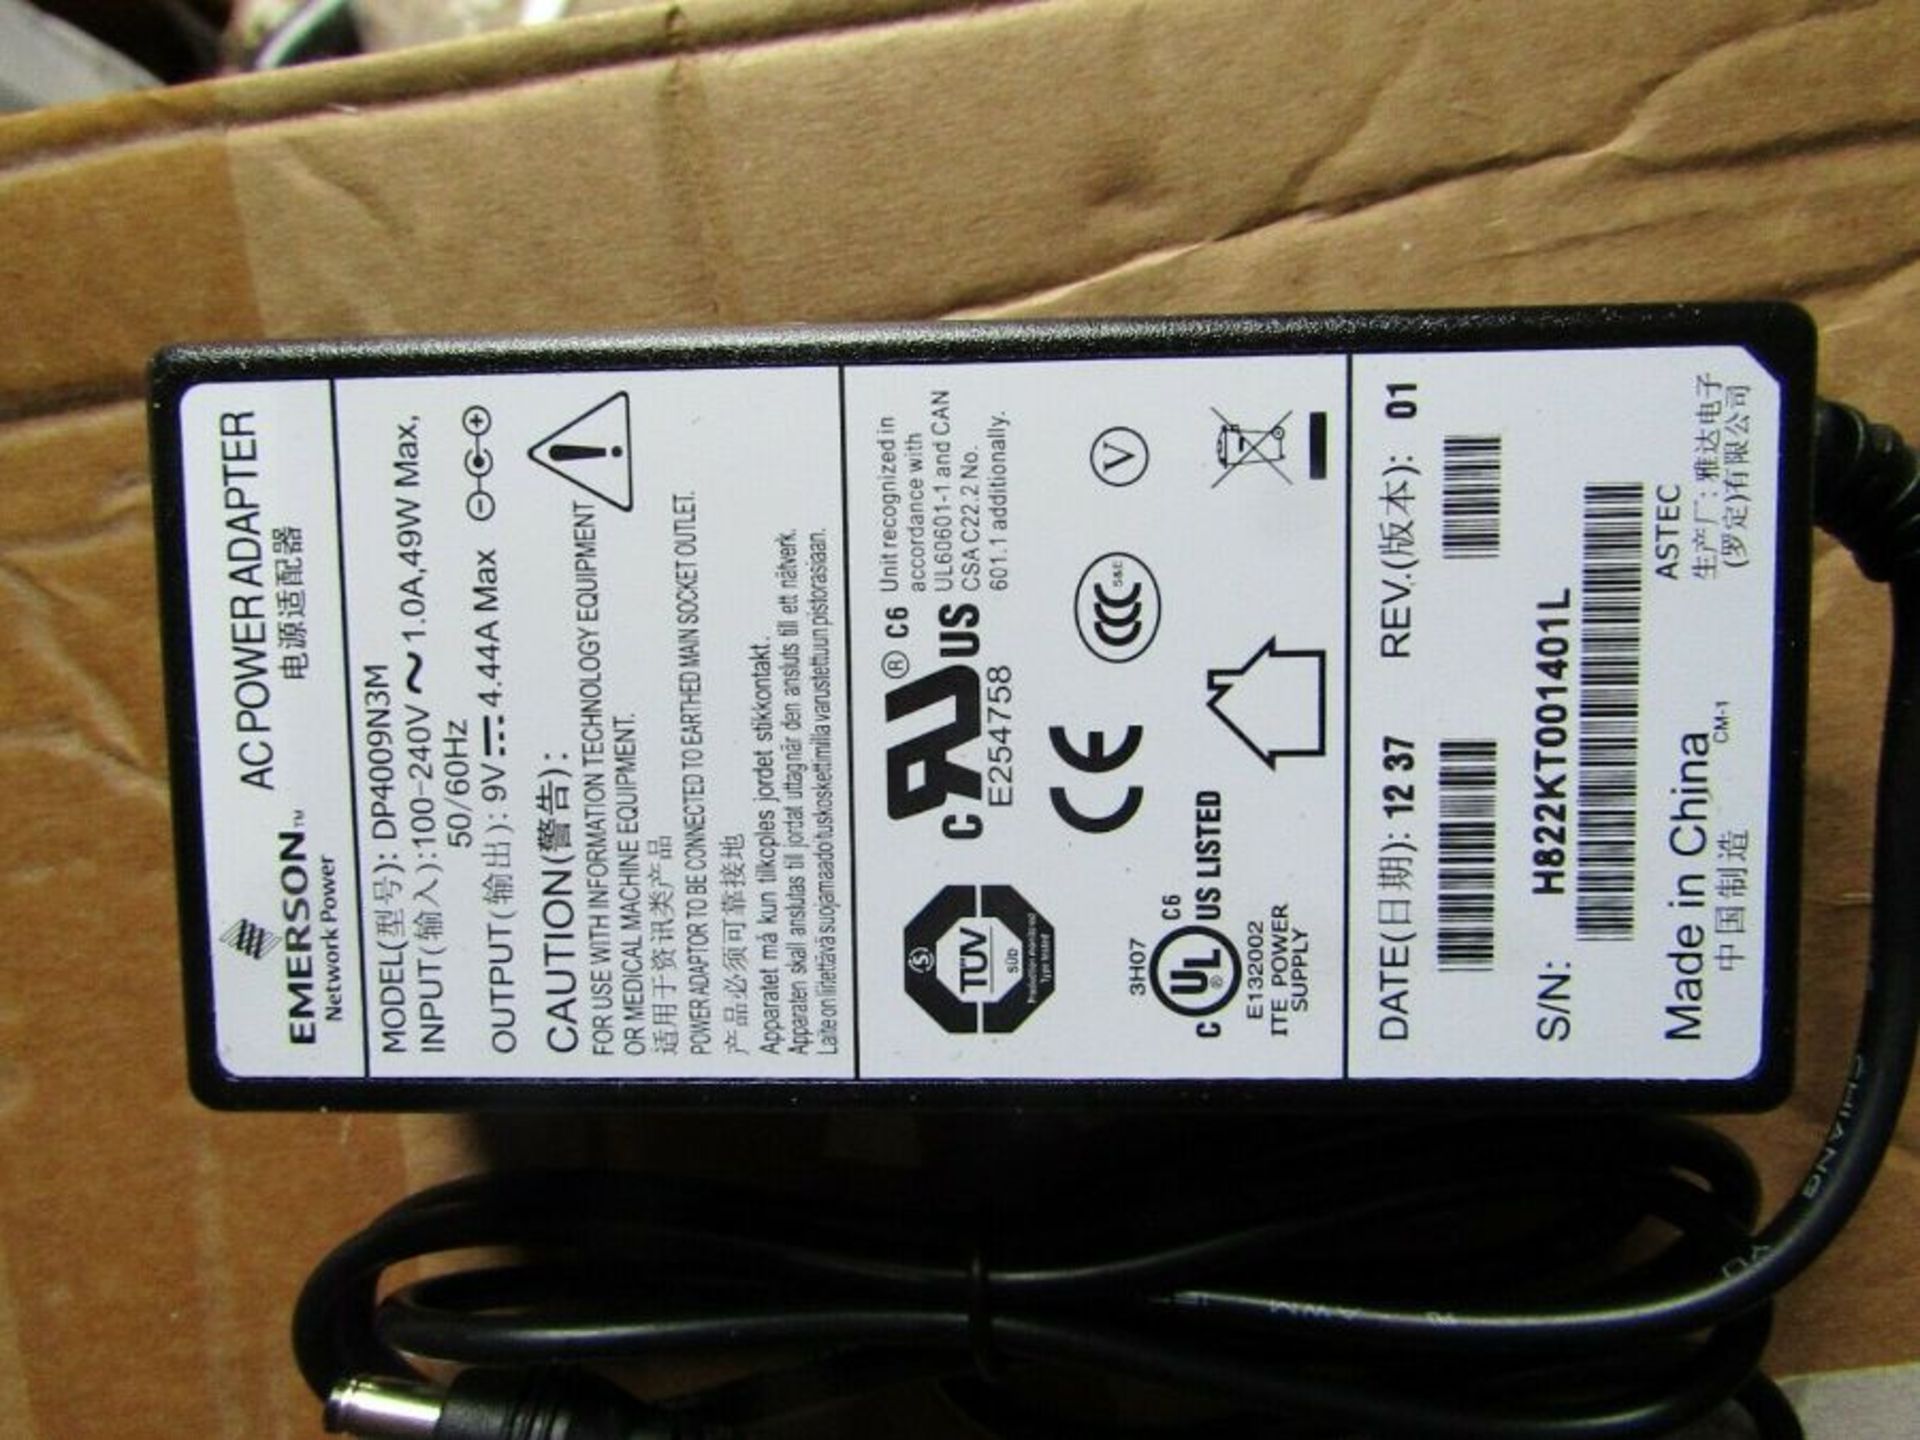 70 x Emerson 9Vdc ErP Single Out Switch Mode Desktop Power Adapter / Supply 4.44A J2 7210976 - Image 2 of 2